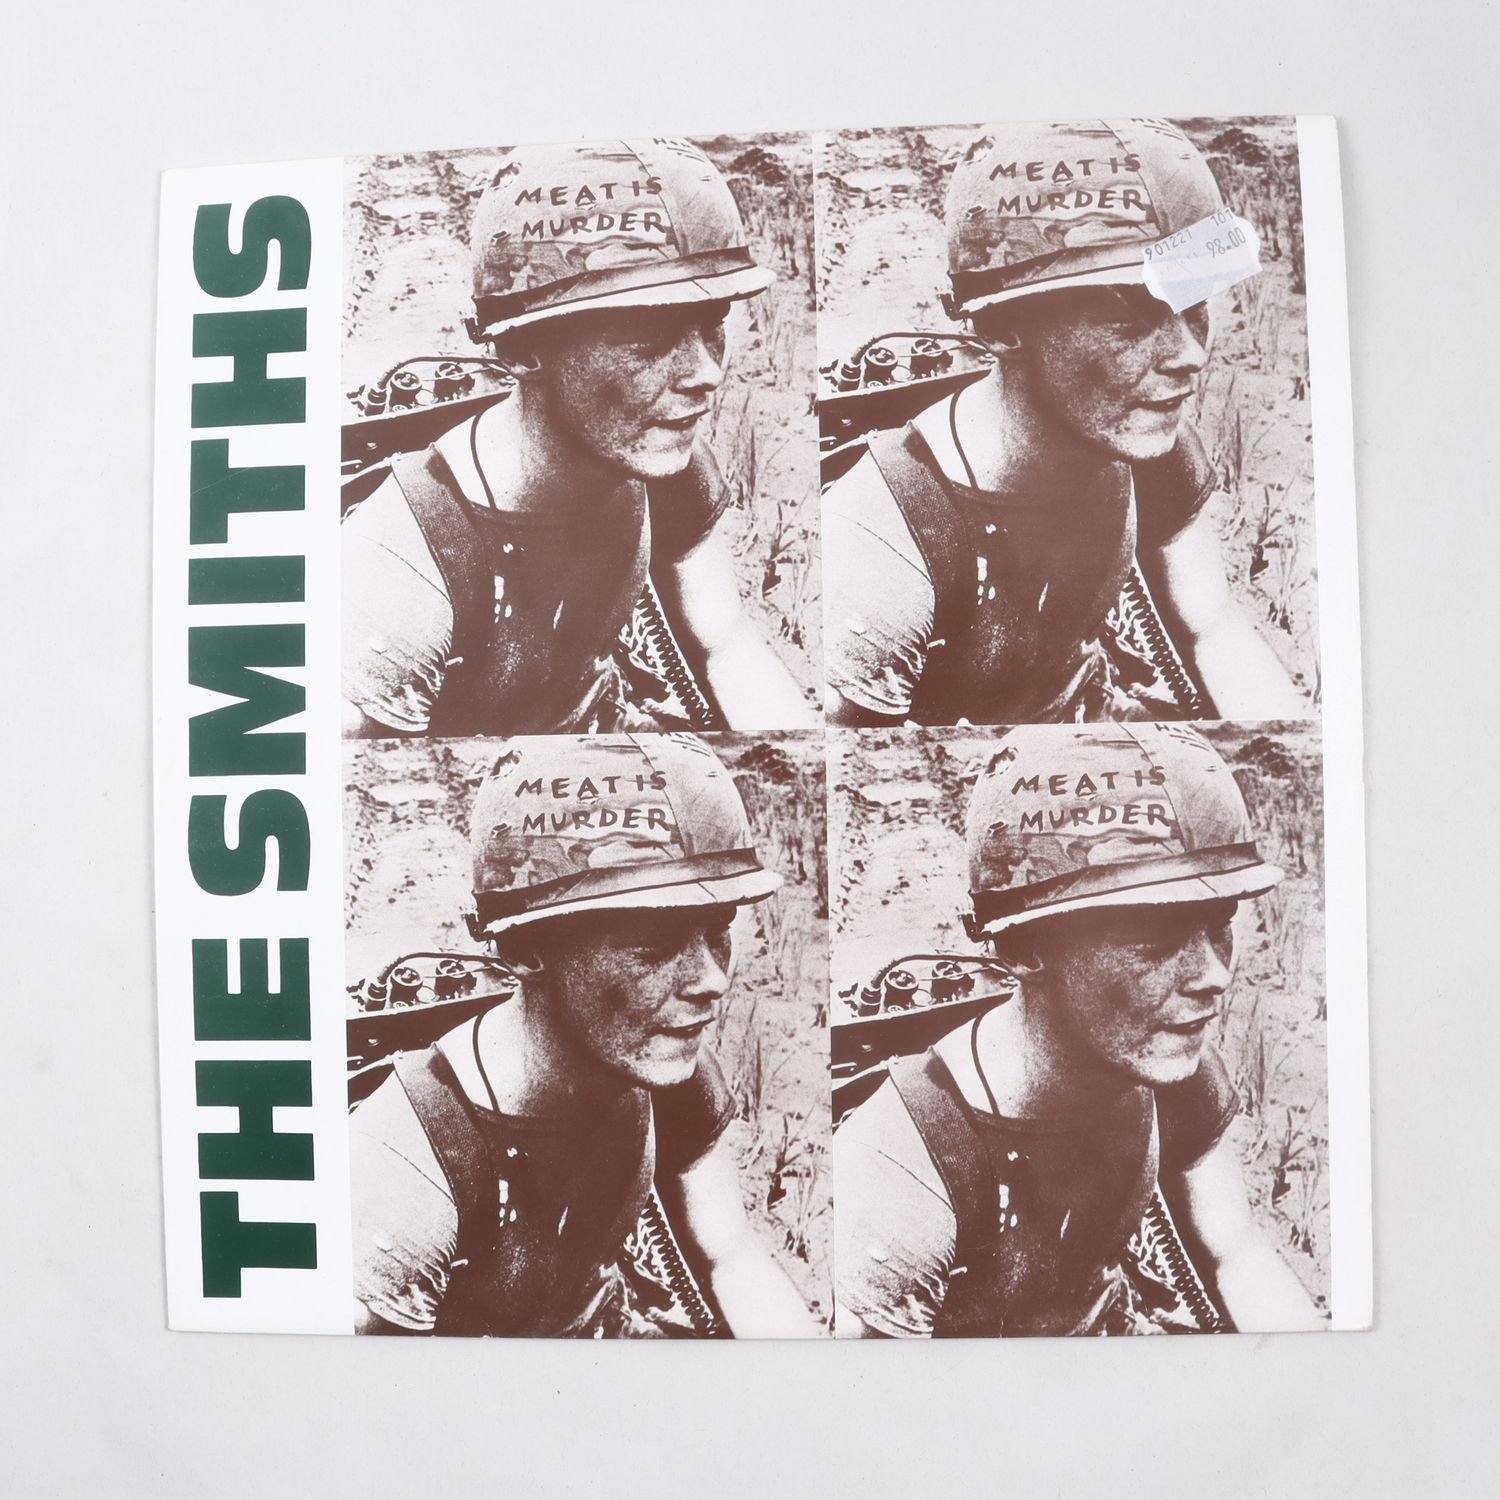 LP The Smiths, Meat Is Murder